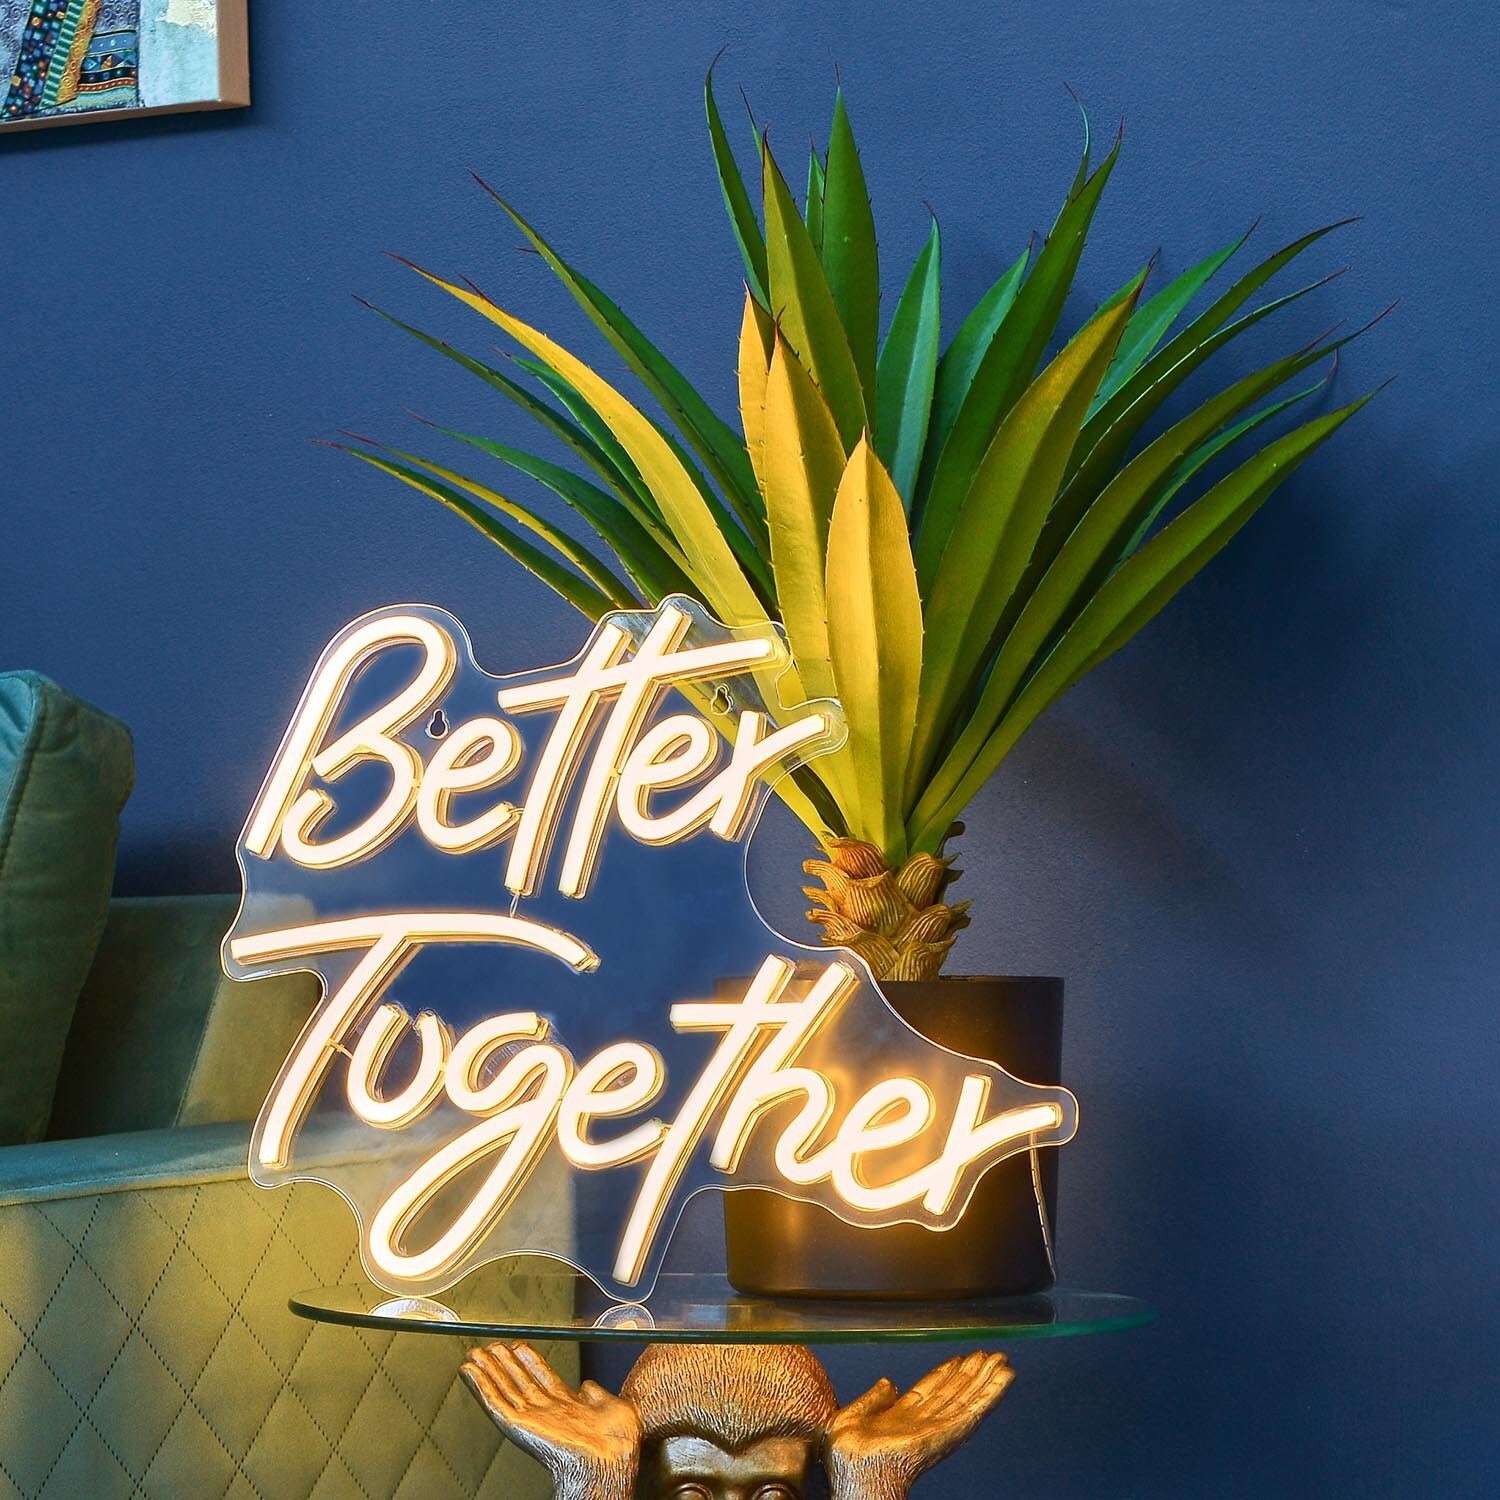 Simple font neon sign "Better Together"  in warm tone